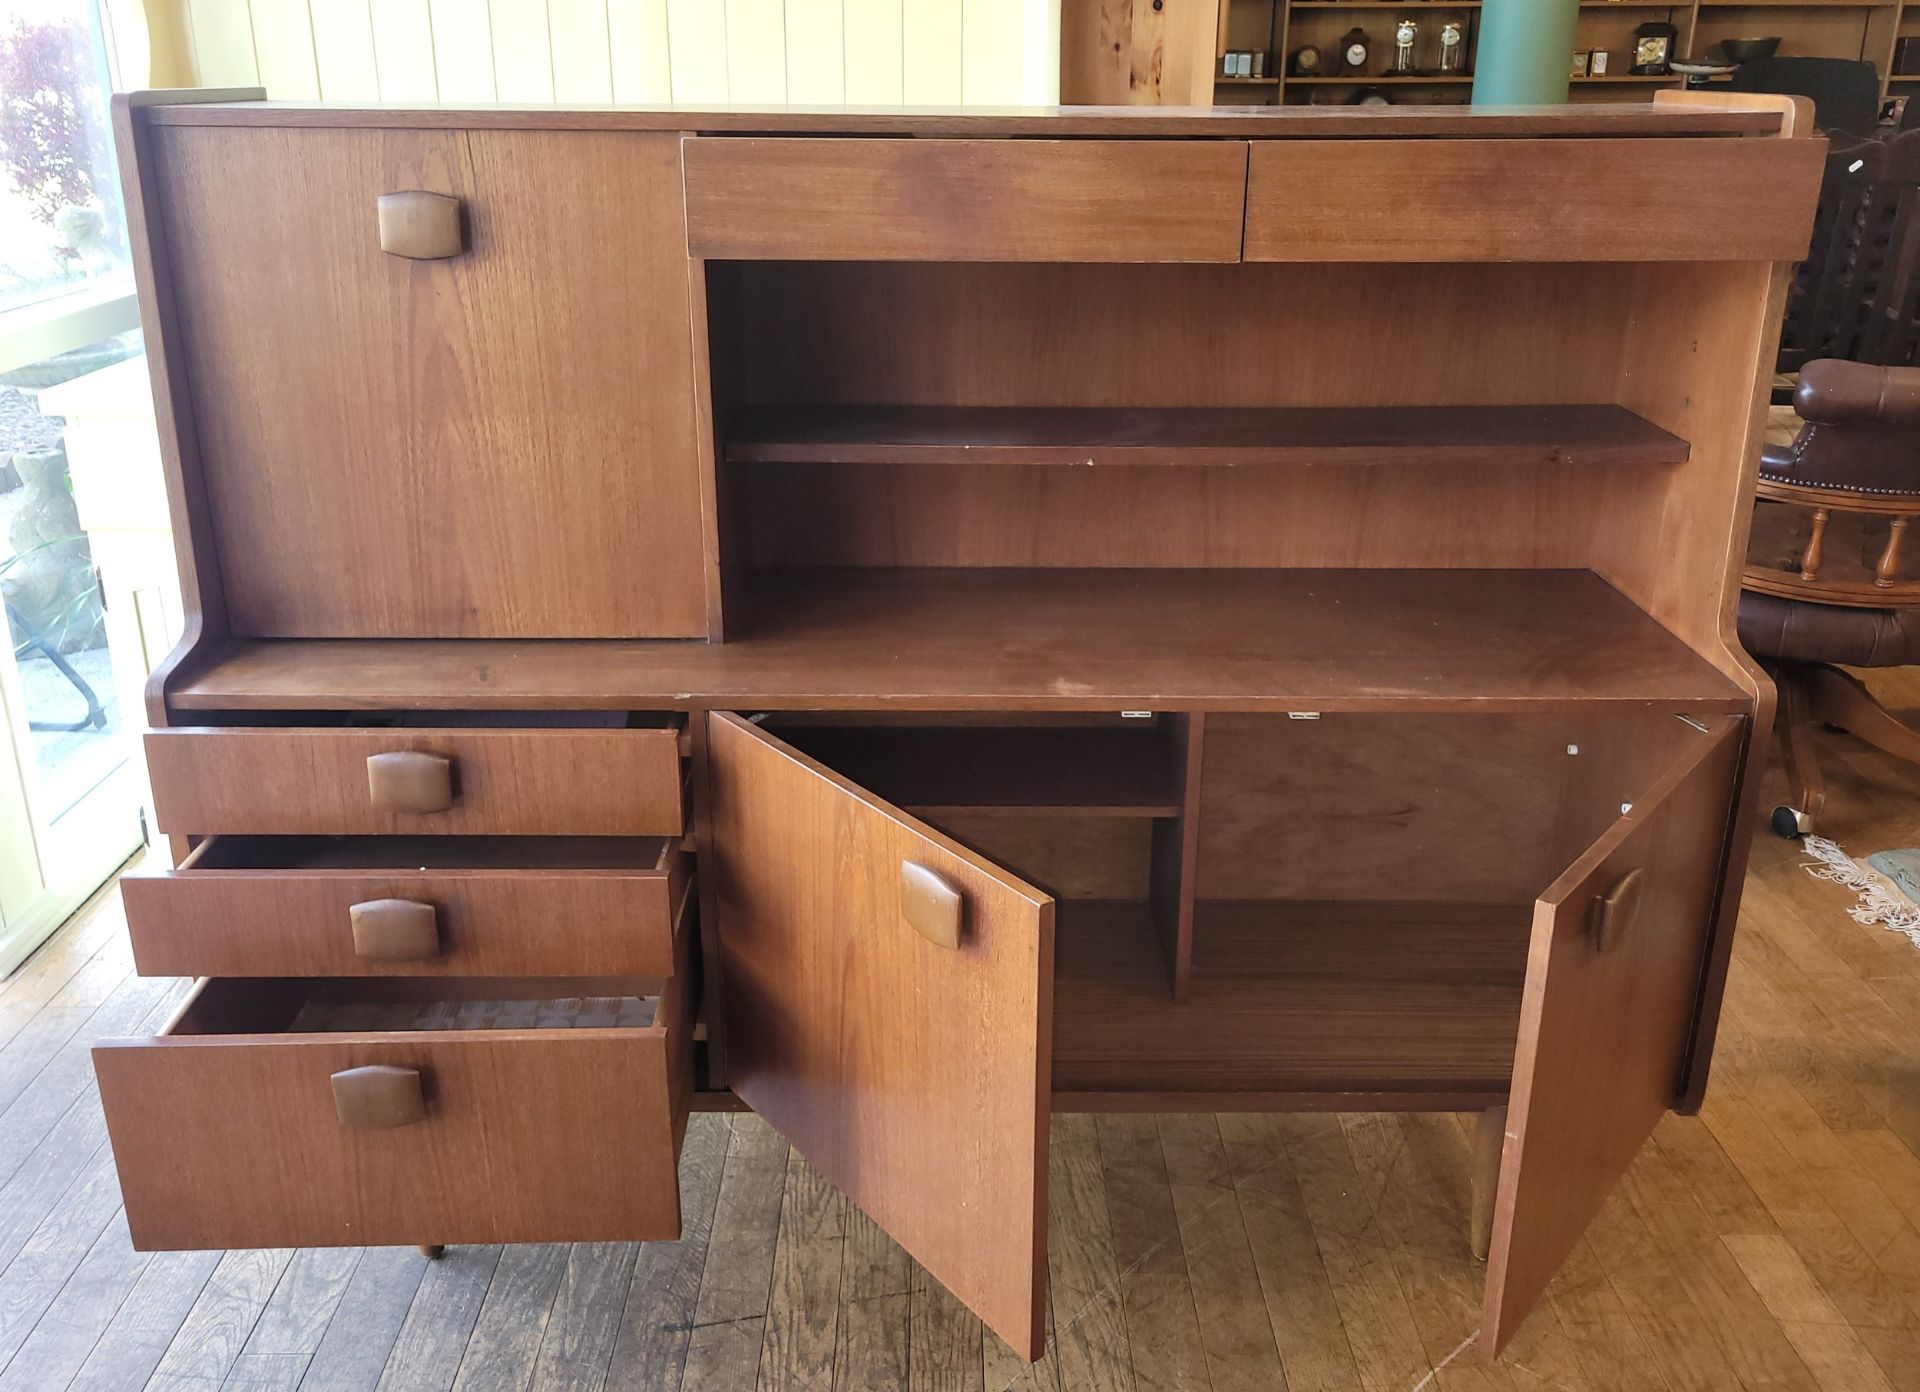 Stonehill Furniture: A mid 20th century teak sideboard/drinks cabinet. W152, H121, D45cm. - Image 2 of 4